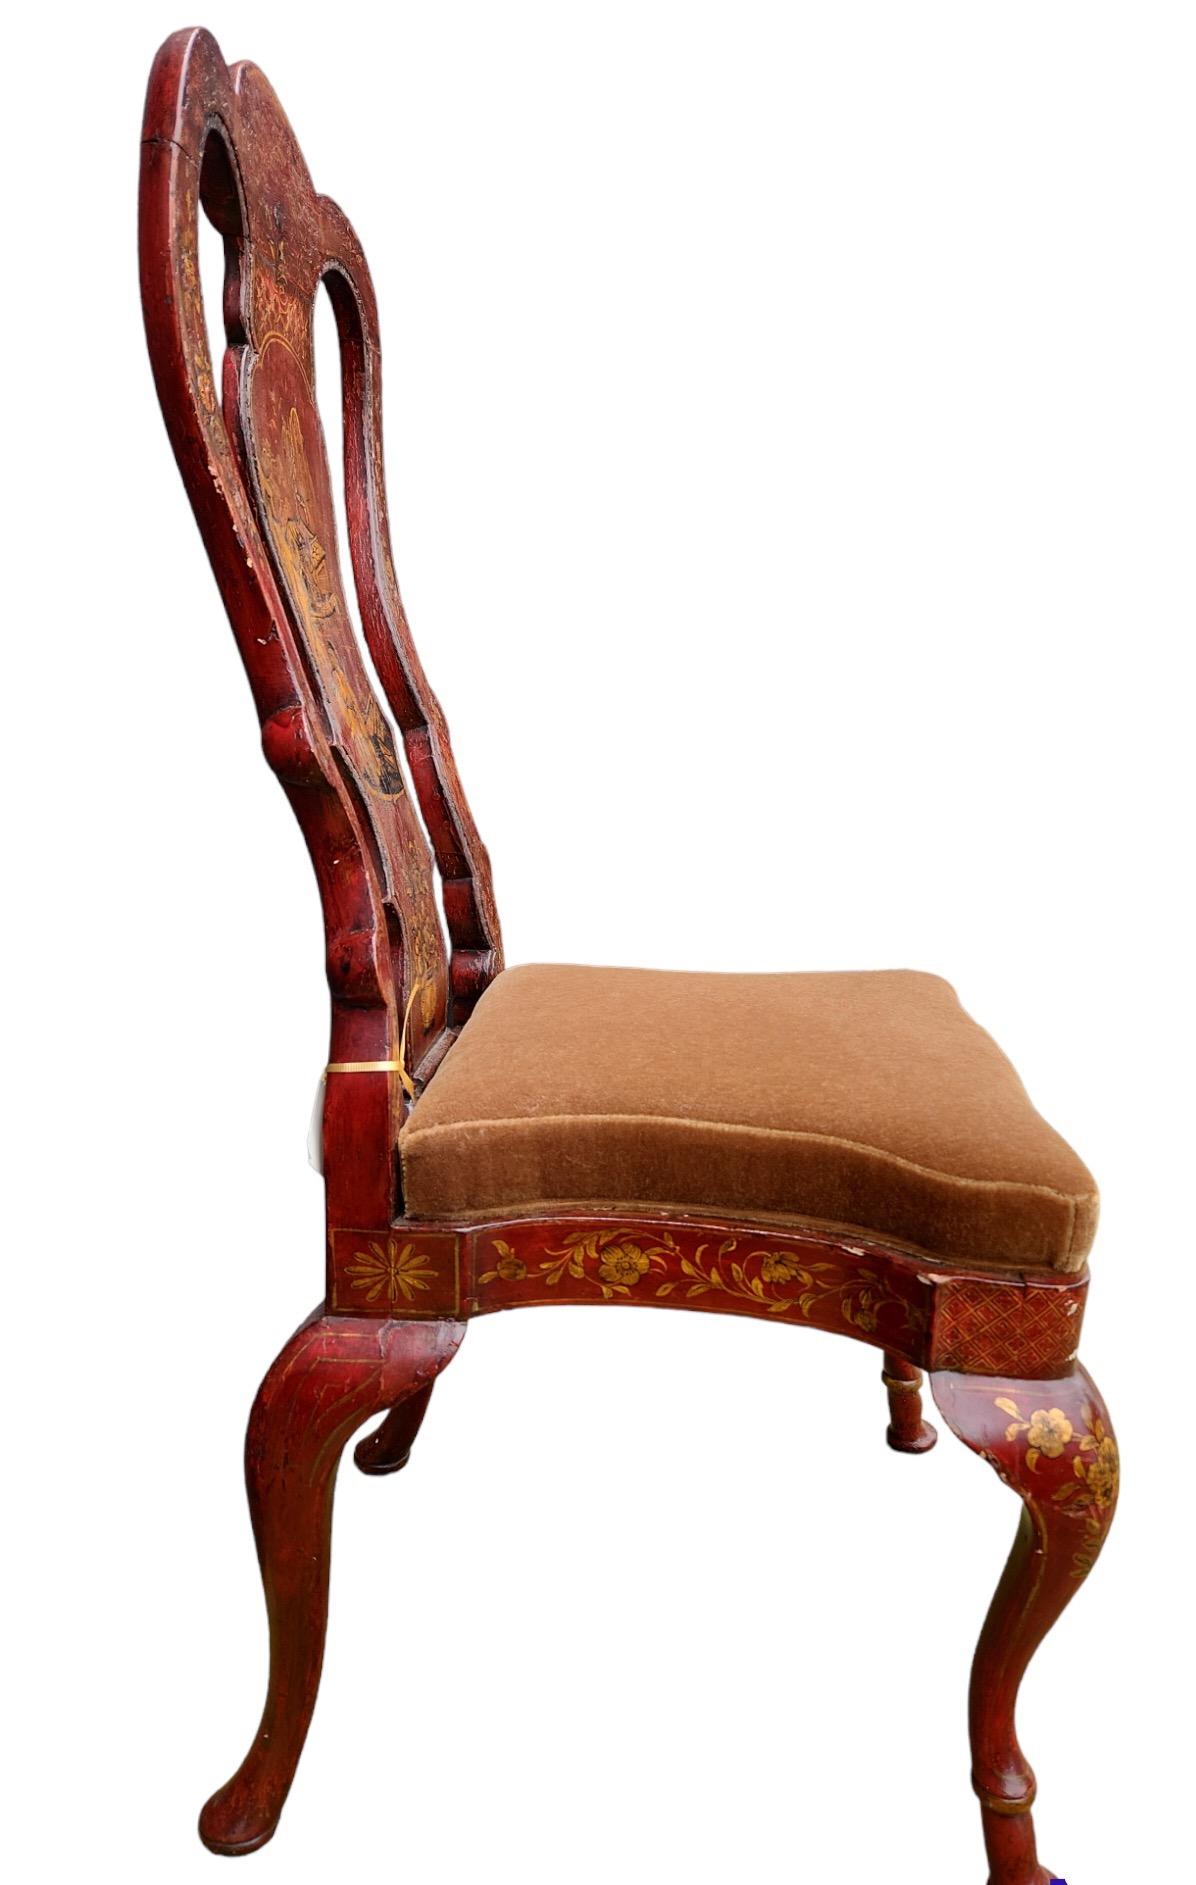 Nicely detailed Queen Anne chair. Seat was originally can but now hard upholstered in new mohair. Strong and sturdy.